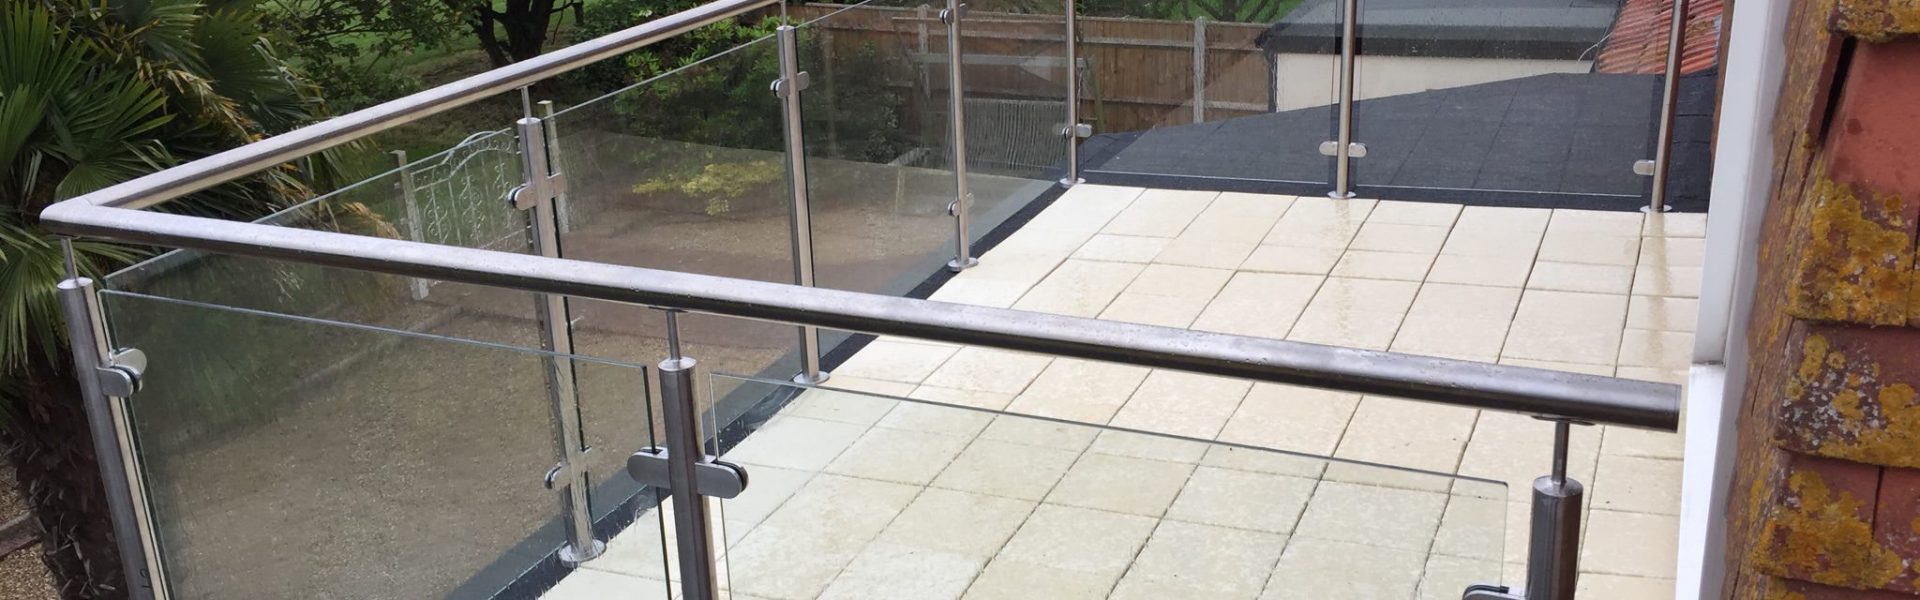 What is the Legal Minimum Handrail height? - Construction Blog